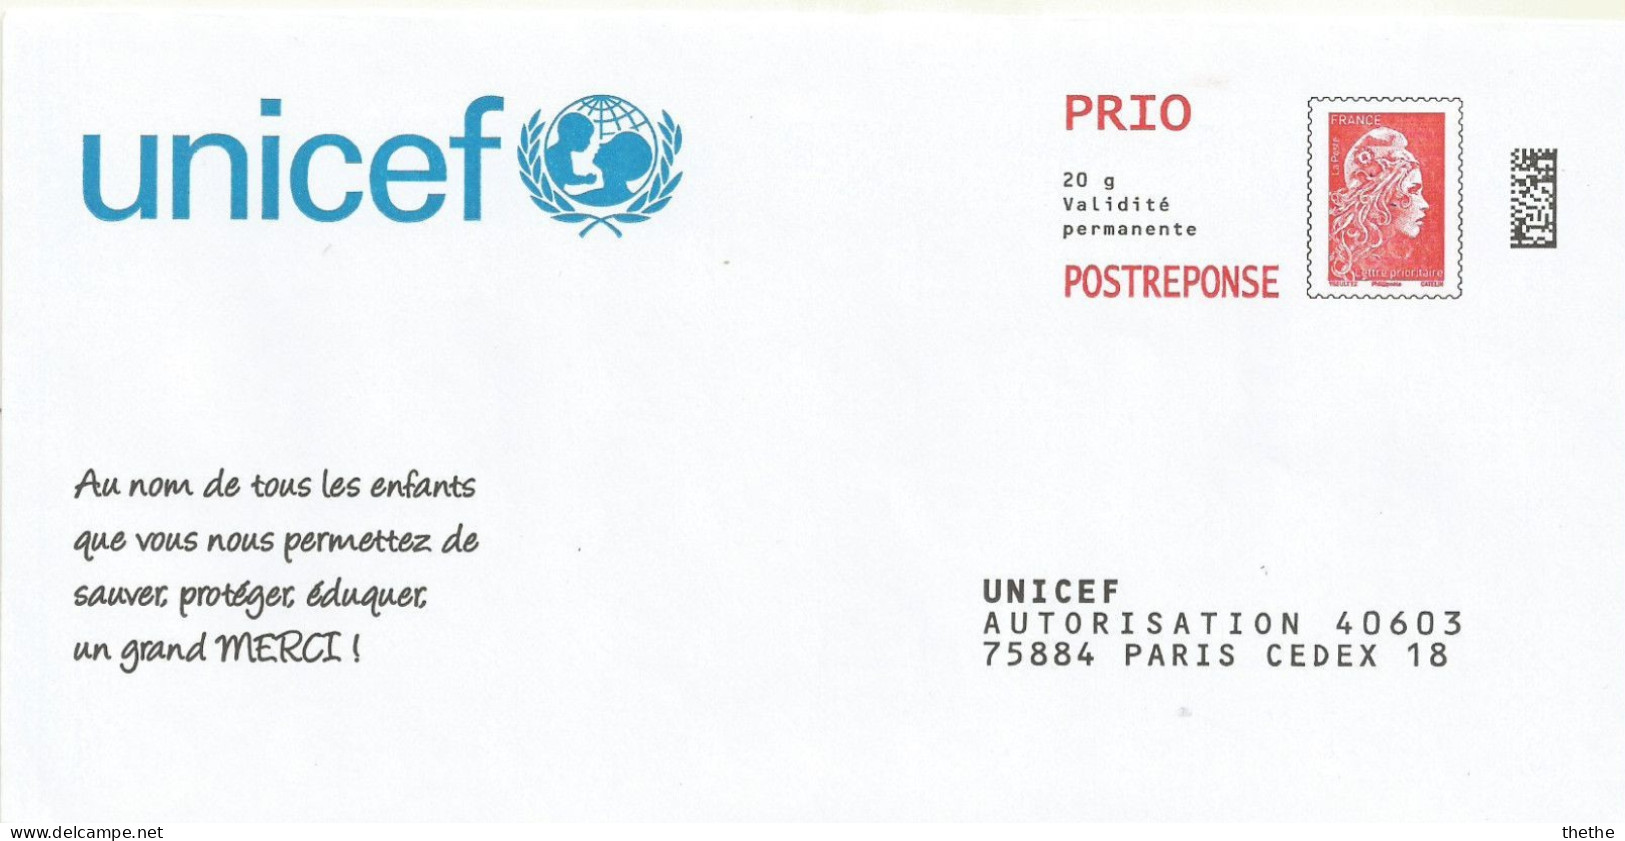 : POSTREPONSE -  PRIO - MARIANNE L'ENGAGEE..  UNICEF - PAP: Ristampa/Marianne L'Engagée